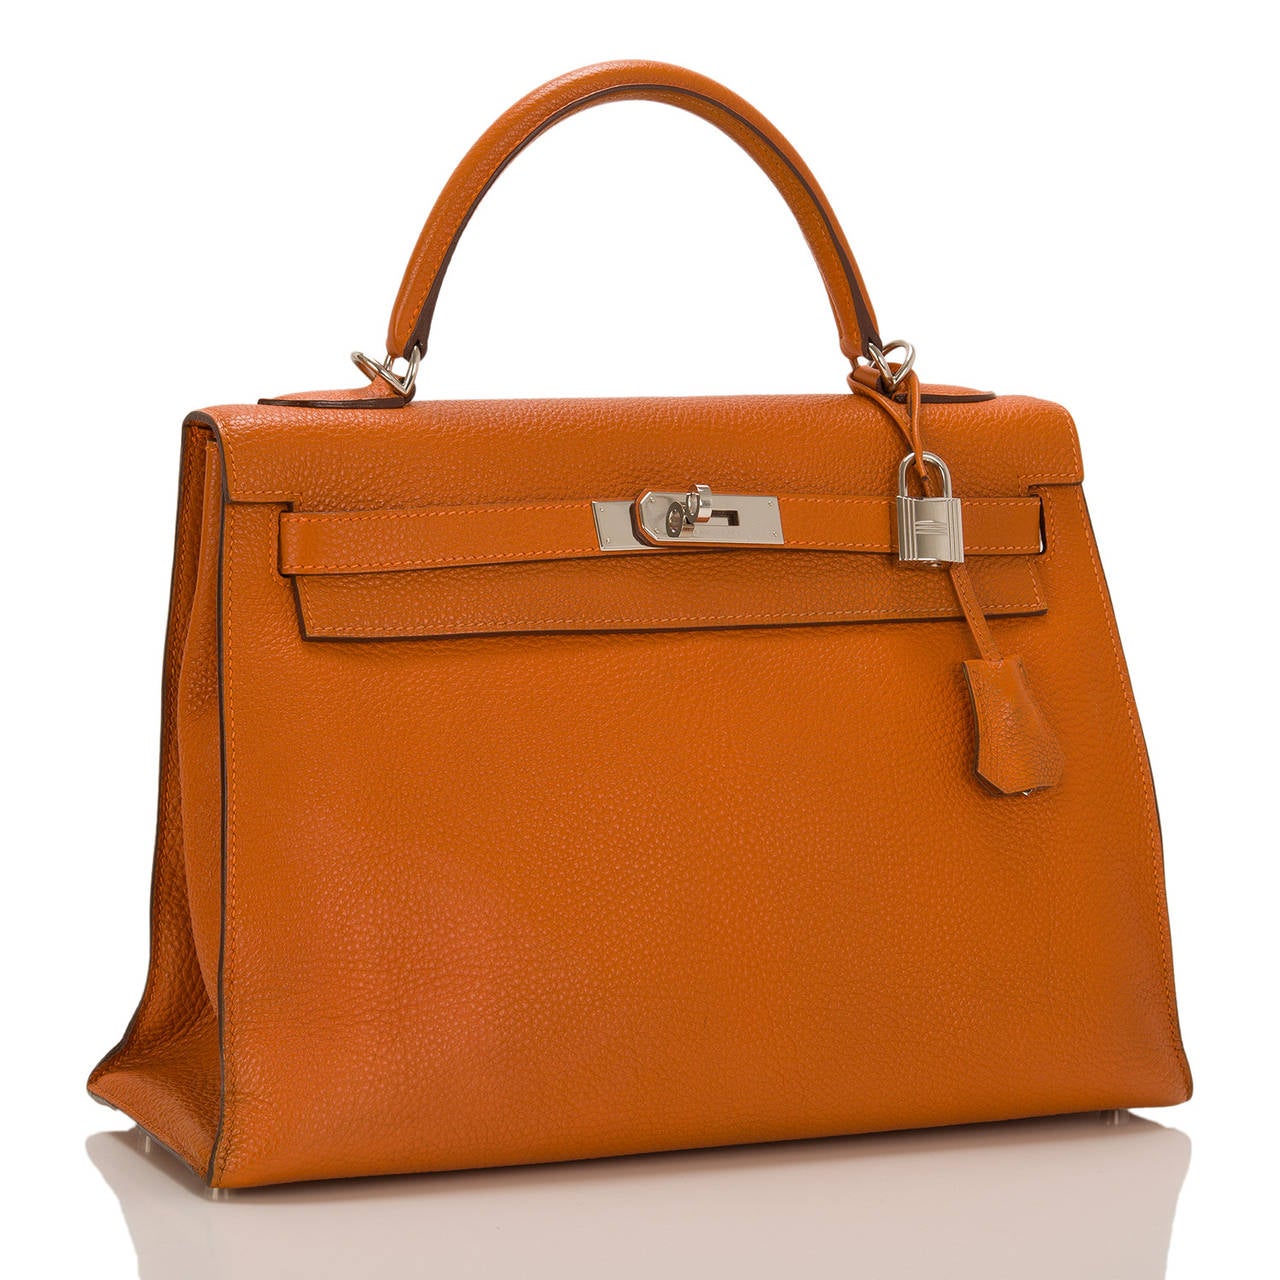 Hermes Potiron (Pumpkin) Kelly 32cm in fjord leather with palladium hardware.

This Kelly features tonal stitching, front toggle closure, a clochette with lock and two keys and a single rolled handle. The interior is lined in Potiron chevre and